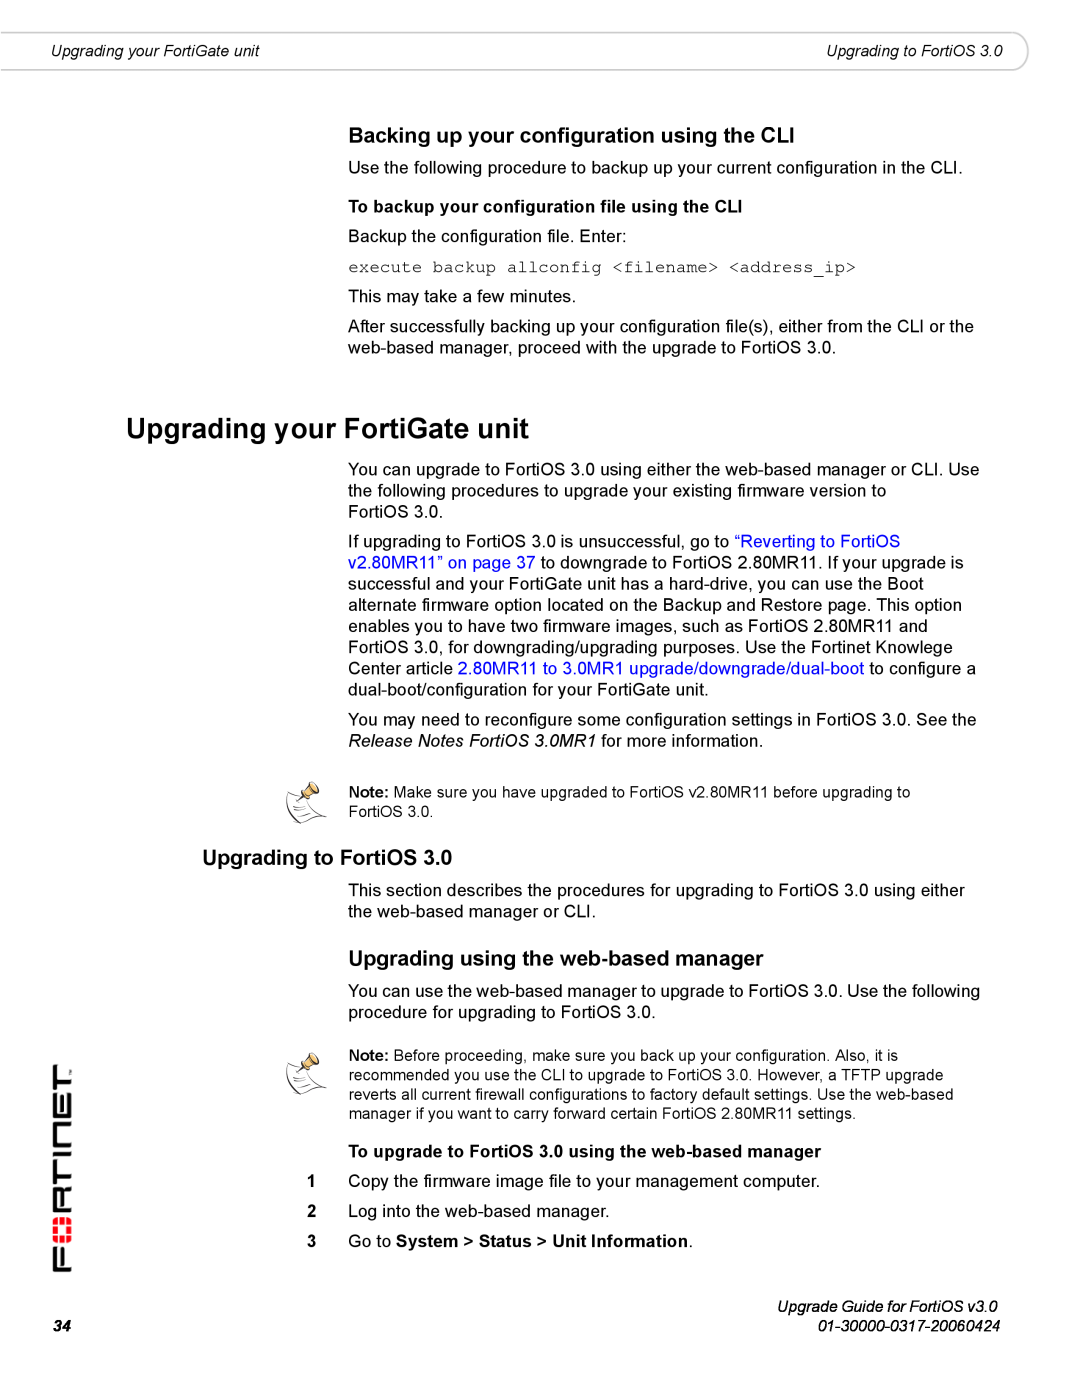 Fortinet FortiOS 3.0 Upgrading your FortiGate unit, Backing up your configuration using the CLI, Upgrading to FortiOS 